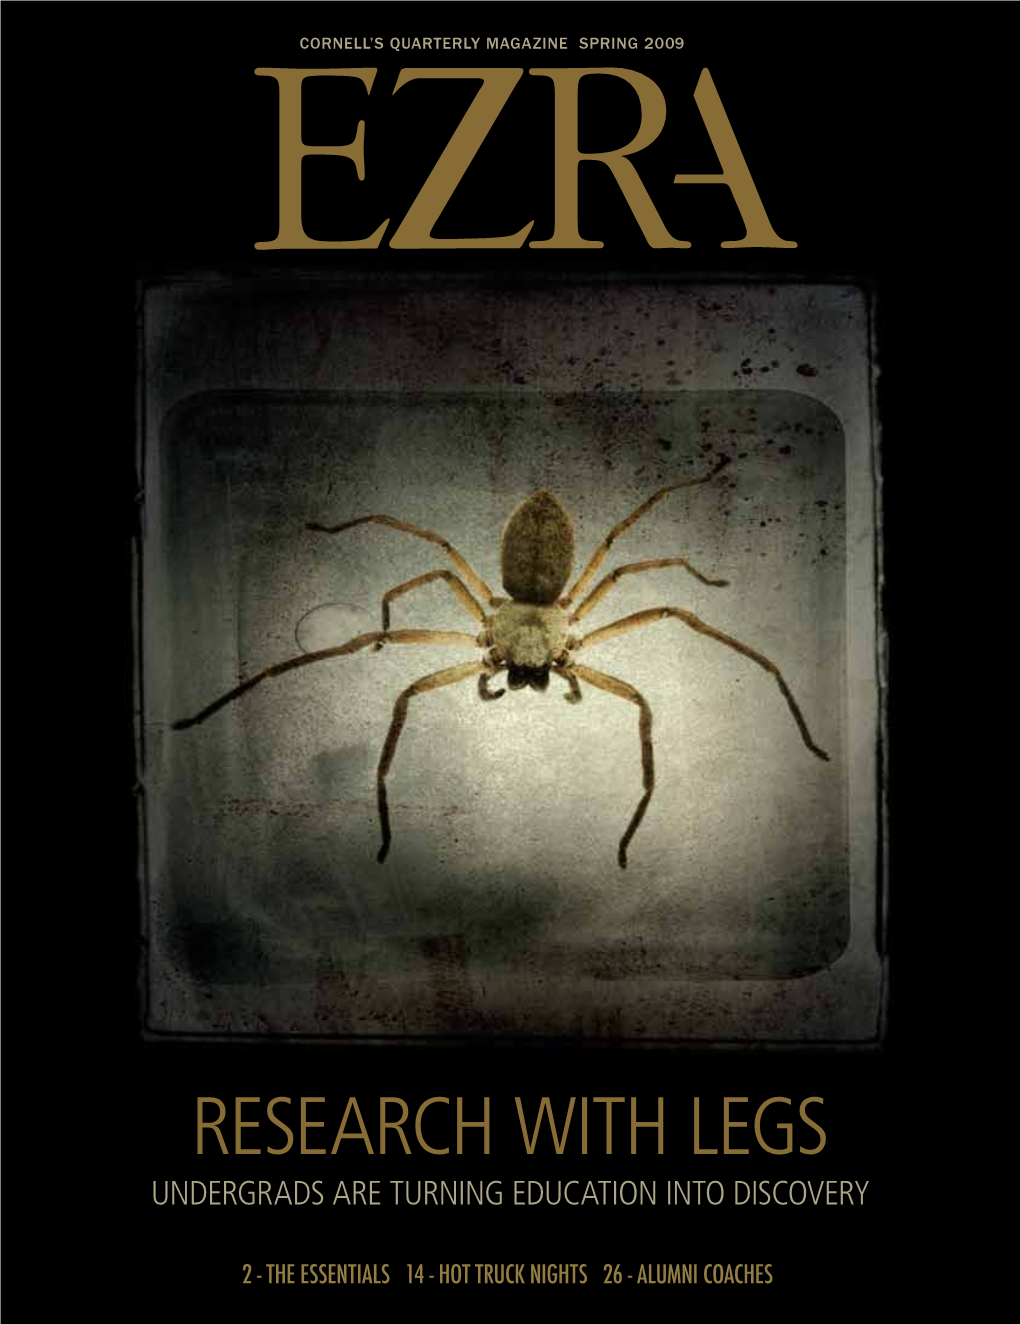 Research That Has Legs Research with Legs